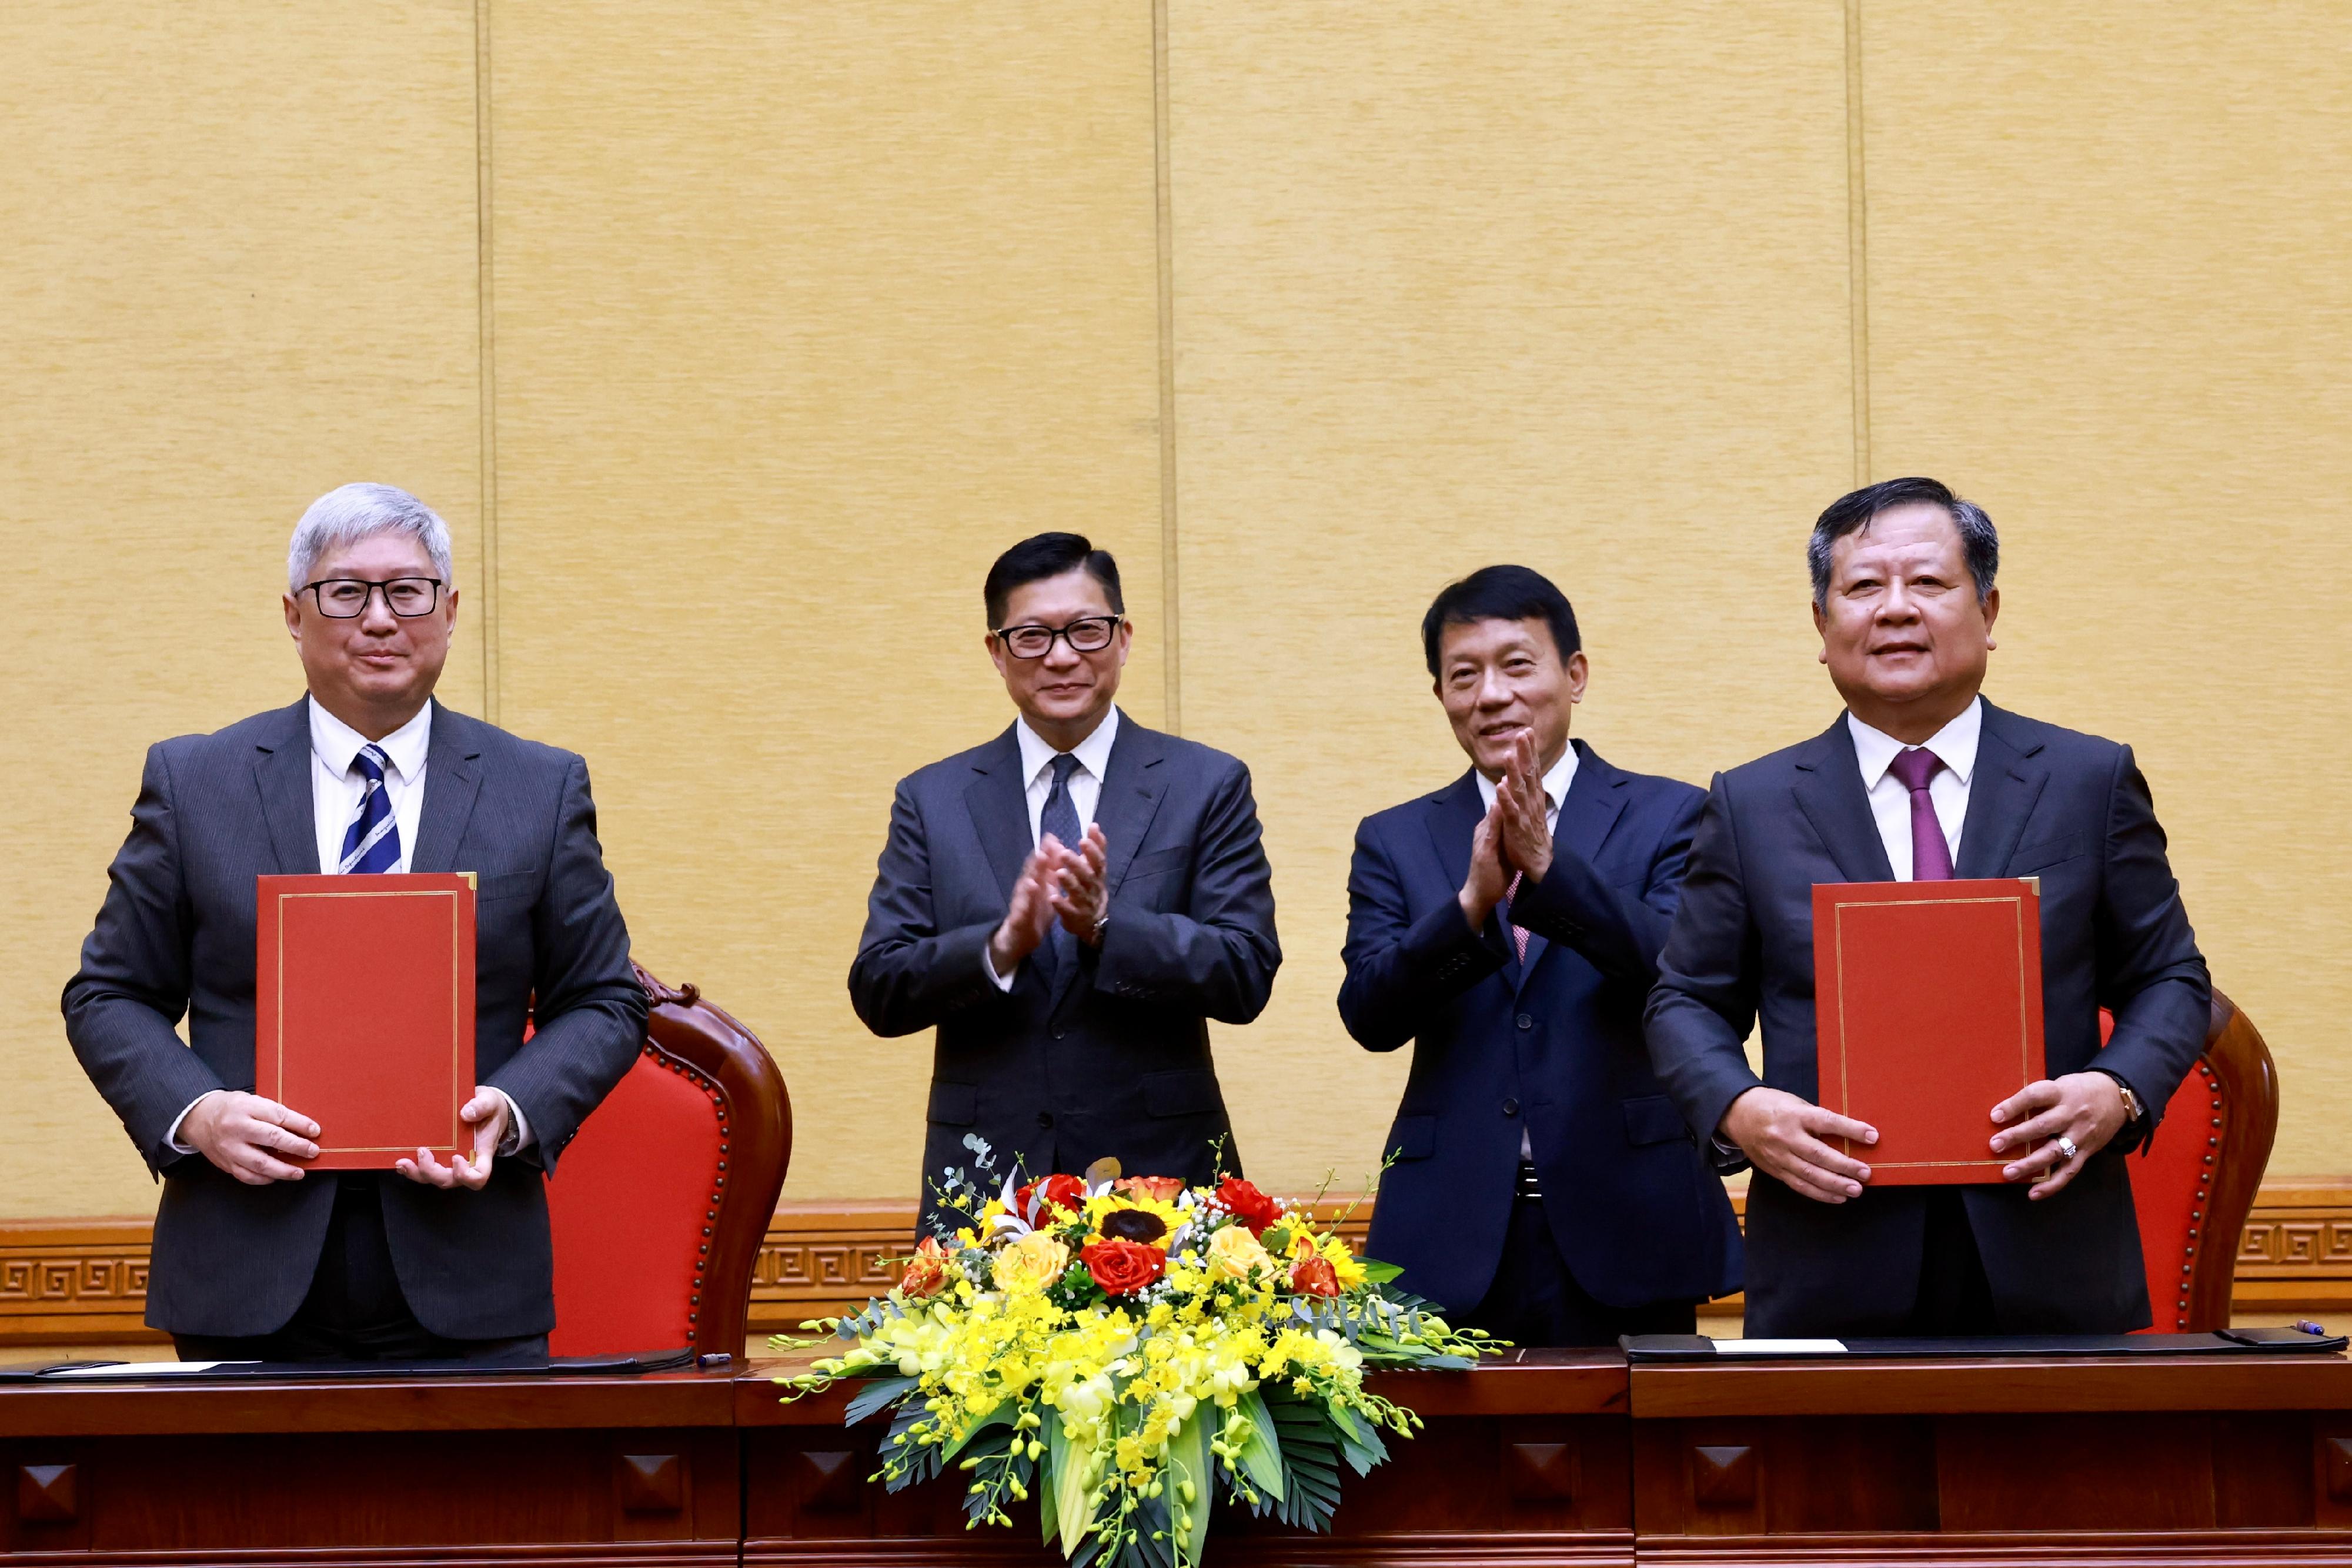 The Secretary for Security, Mr Tang Ping-keung, began his visit programme in Vietnam today (August 28). Photo shows Mr Tang (back row, first left) and the Deputy Minister of Public Security of Vietnam, Senior Lieutenant General Luong Tam Quang (back row, first right), witnessing the signing of the Memorandum of Understanding by the Director of Immigration, Mr Au Ka-wang (front row, first left), and the Director General of Immigration Department of Vietnam, Mr Pham Dang Khoa (front row, first right), on enhancing co-operation in respect of immigration matters of the two places.